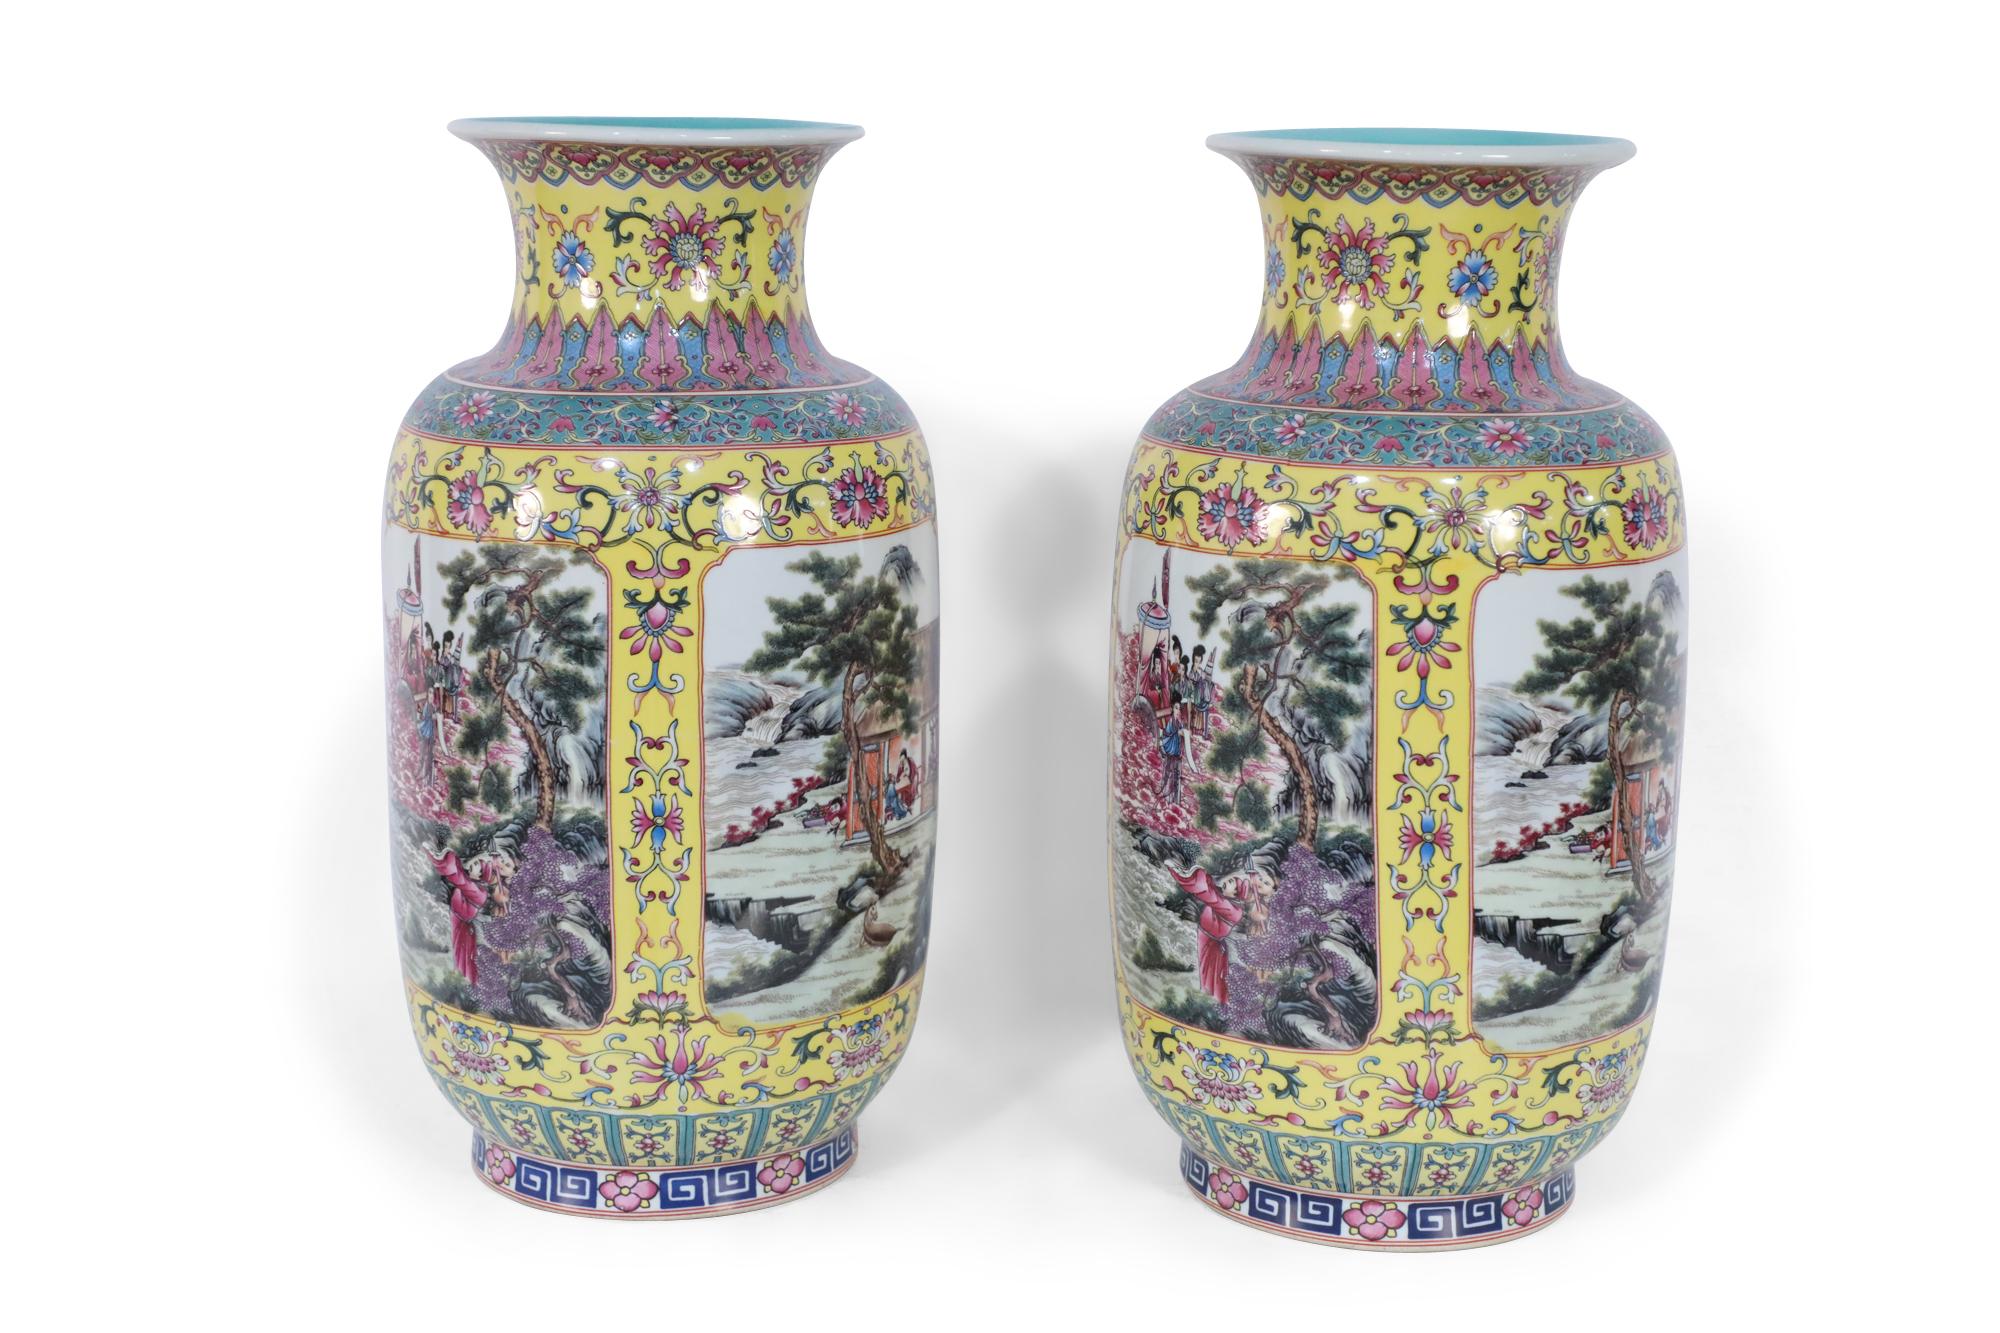 Pair of Chinese Yellow and Turquoise Genre Vignette Porcelain Vases 3